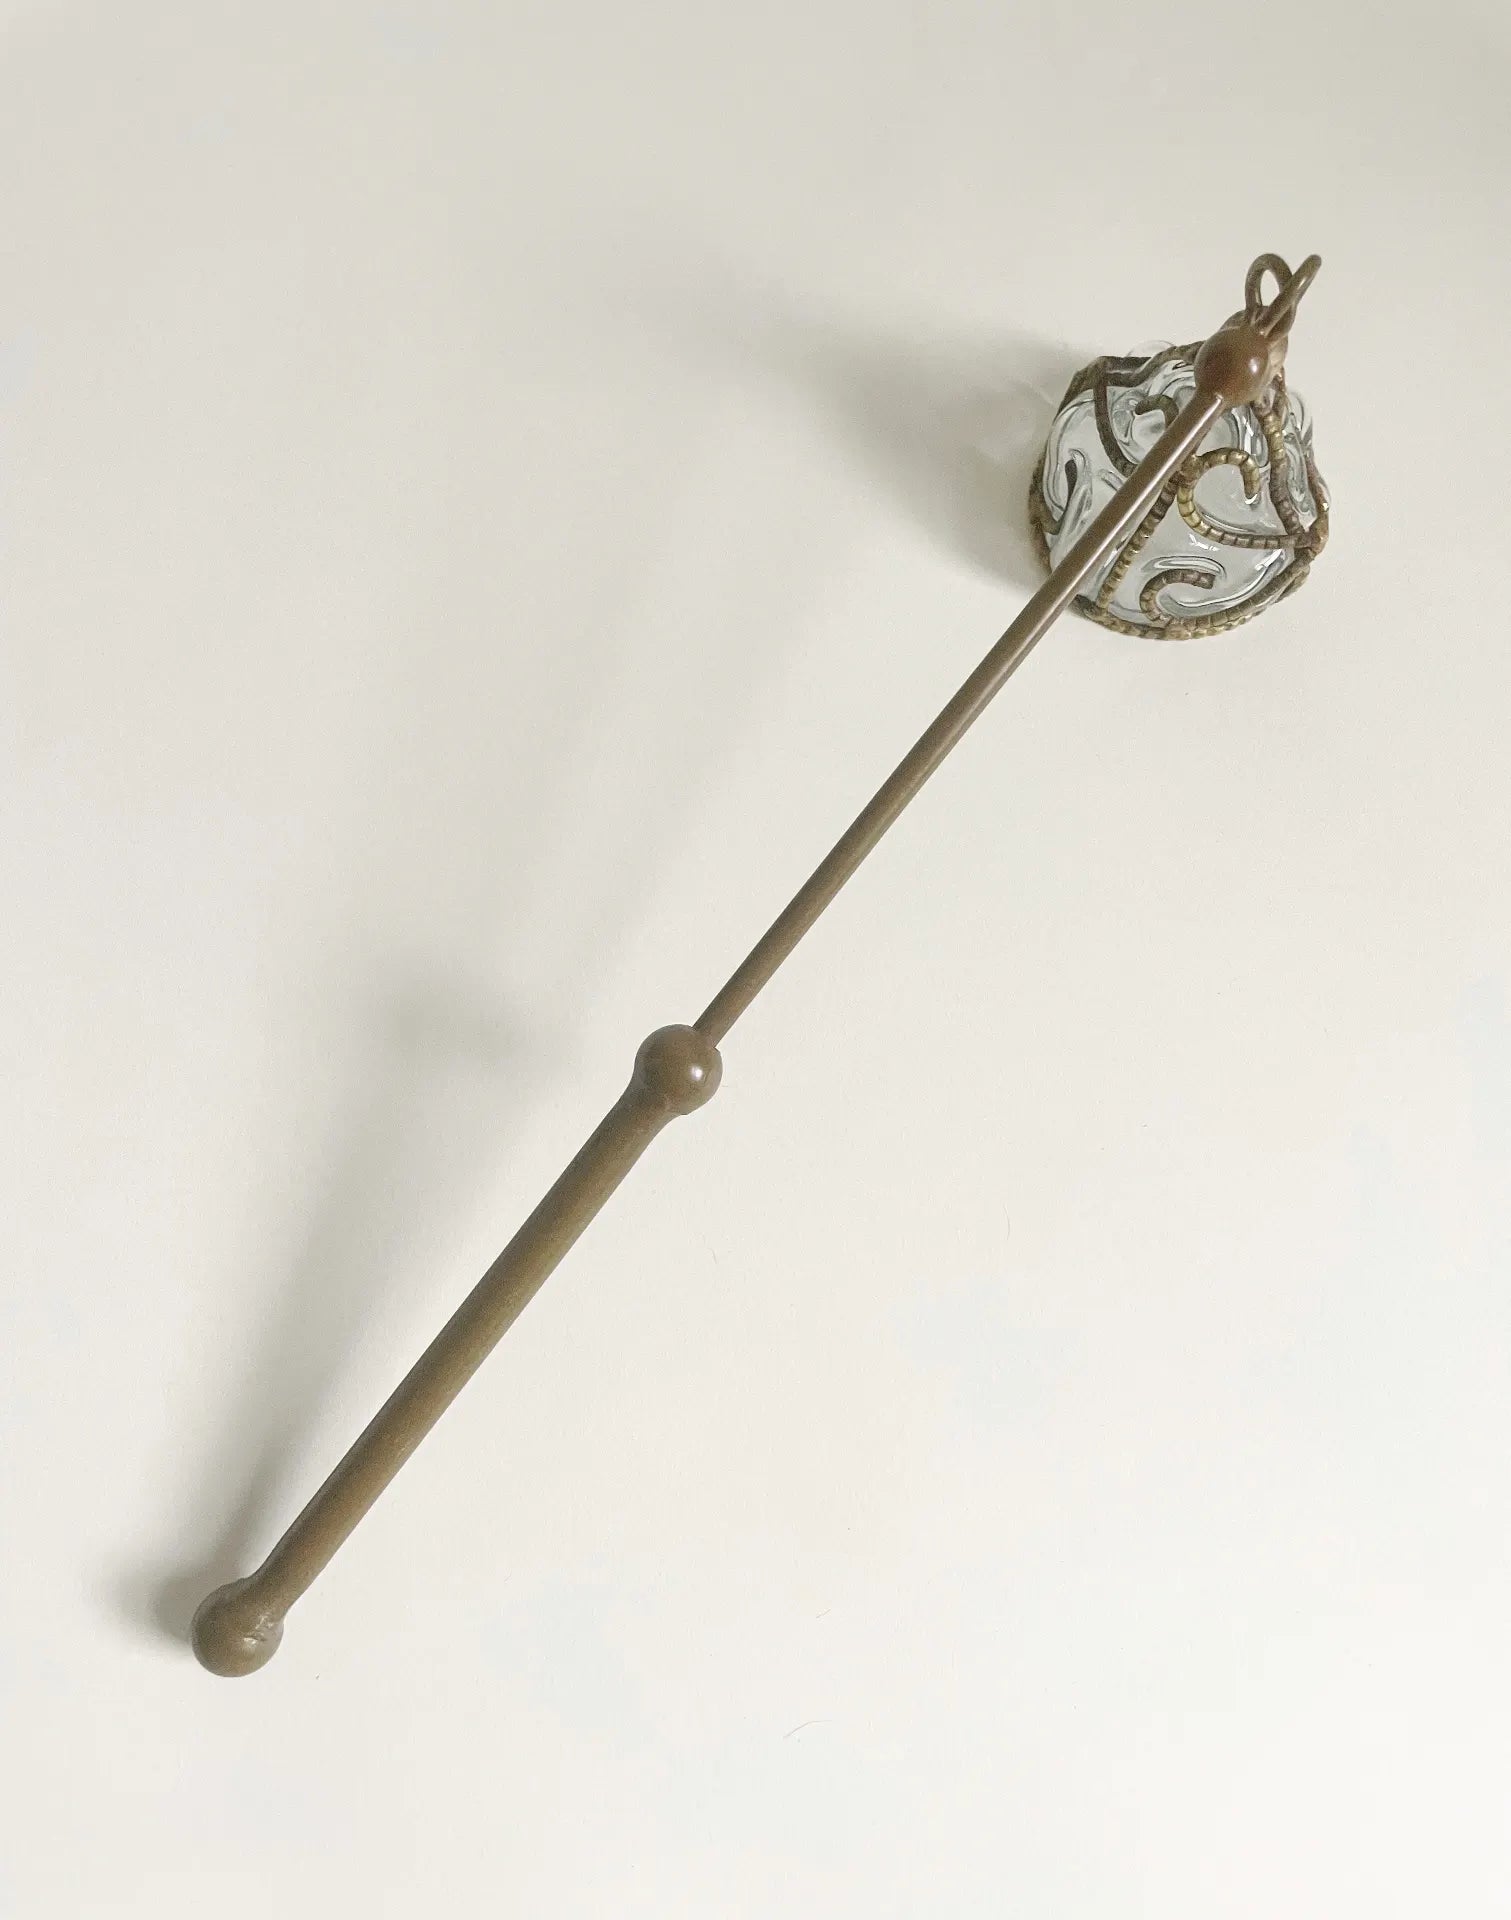 A 12-inch vintage brass candle snuffer with hand-blown glass bell and ornate brass filigree cage